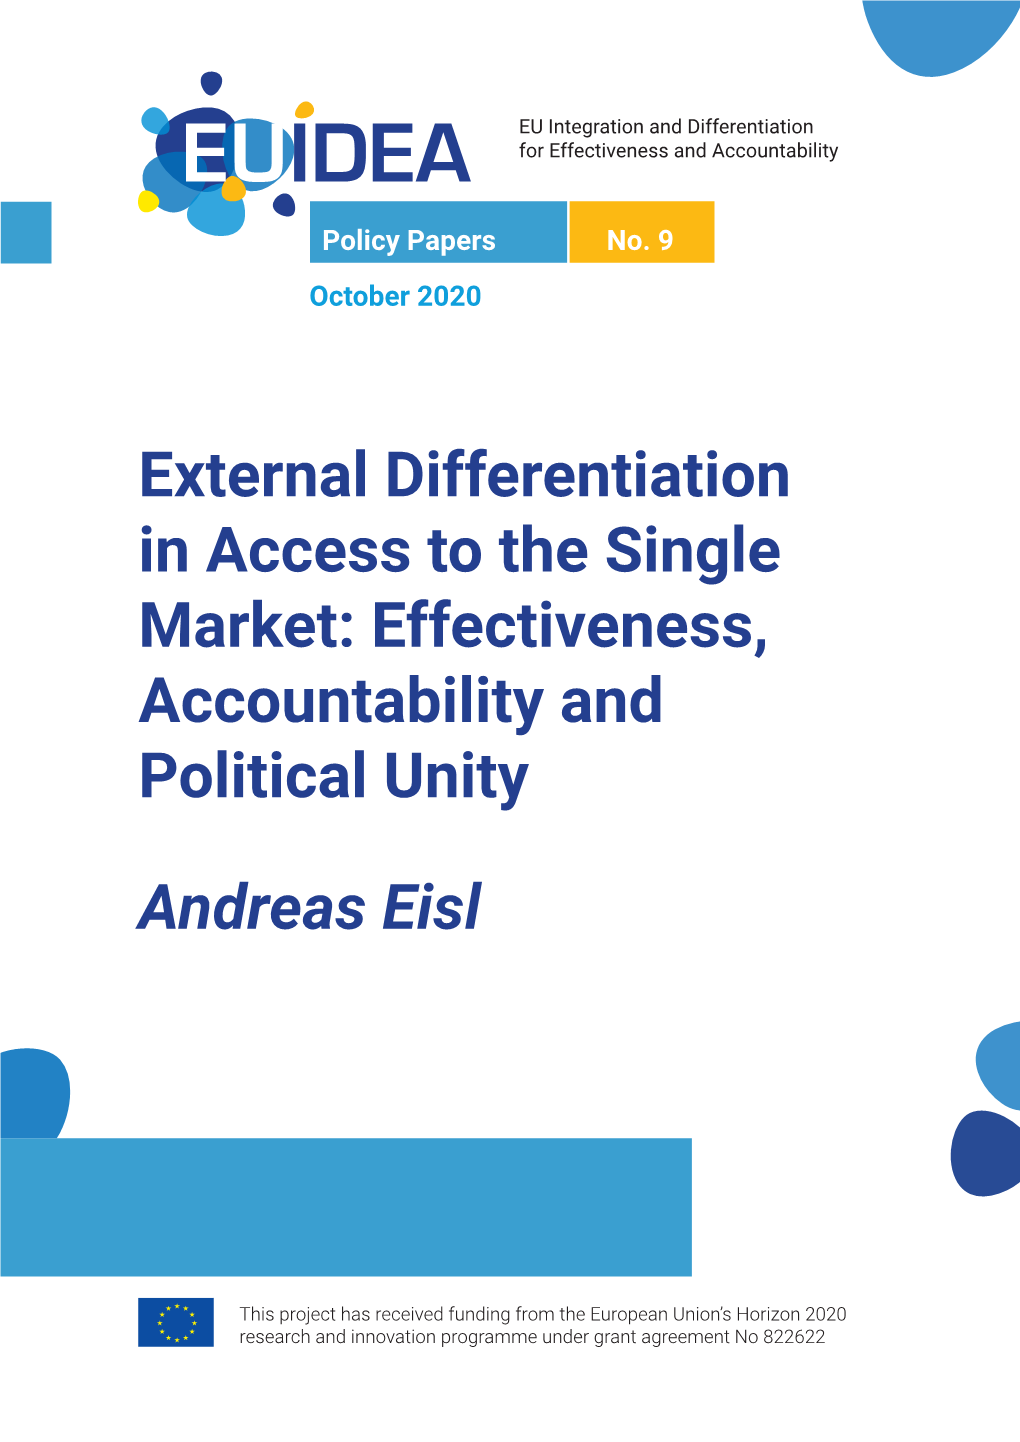 External Differentiation in Access to the Single Market: Effectiveness, Accountability and Political Unity